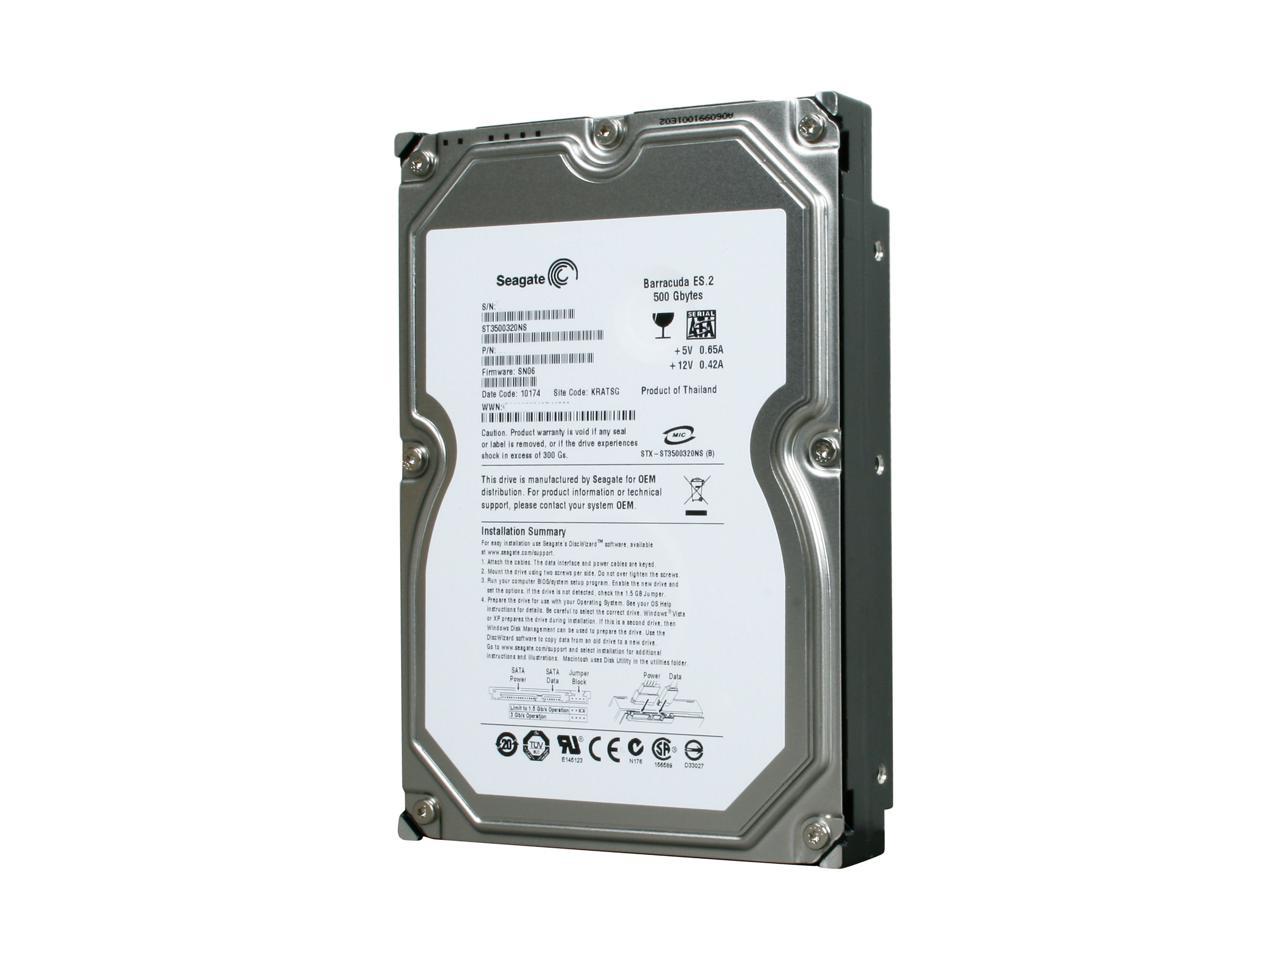 Data Recovery Service Seagate Barracuda ST3500320NS 7200.11 firmware brick issue